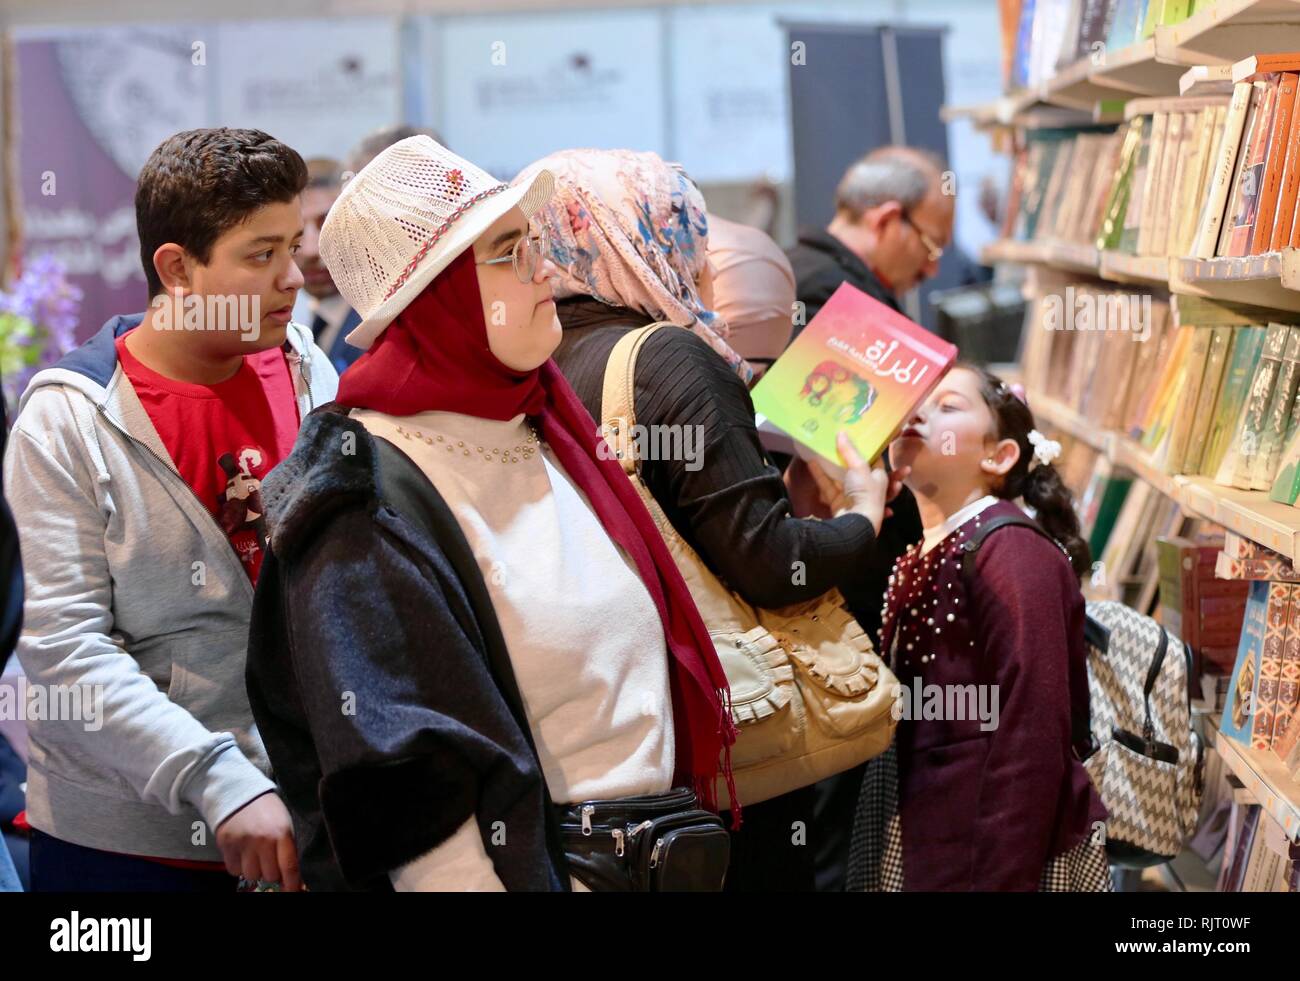 Baghdad, Iraq. 7th Feb, 2019. People select books at the Baghdad International Book Fair 2019, in Baghdad, Iraq, Feb. 7, 2019. The fair kicked off Thursday with the participation of hundreds of publishers and high attendance of readers, as it sheds more light on eradicating terror and extremism in the war-torn country. Credit: Khalil Dawood/Xinhua/Alamy Live News Stock Photo